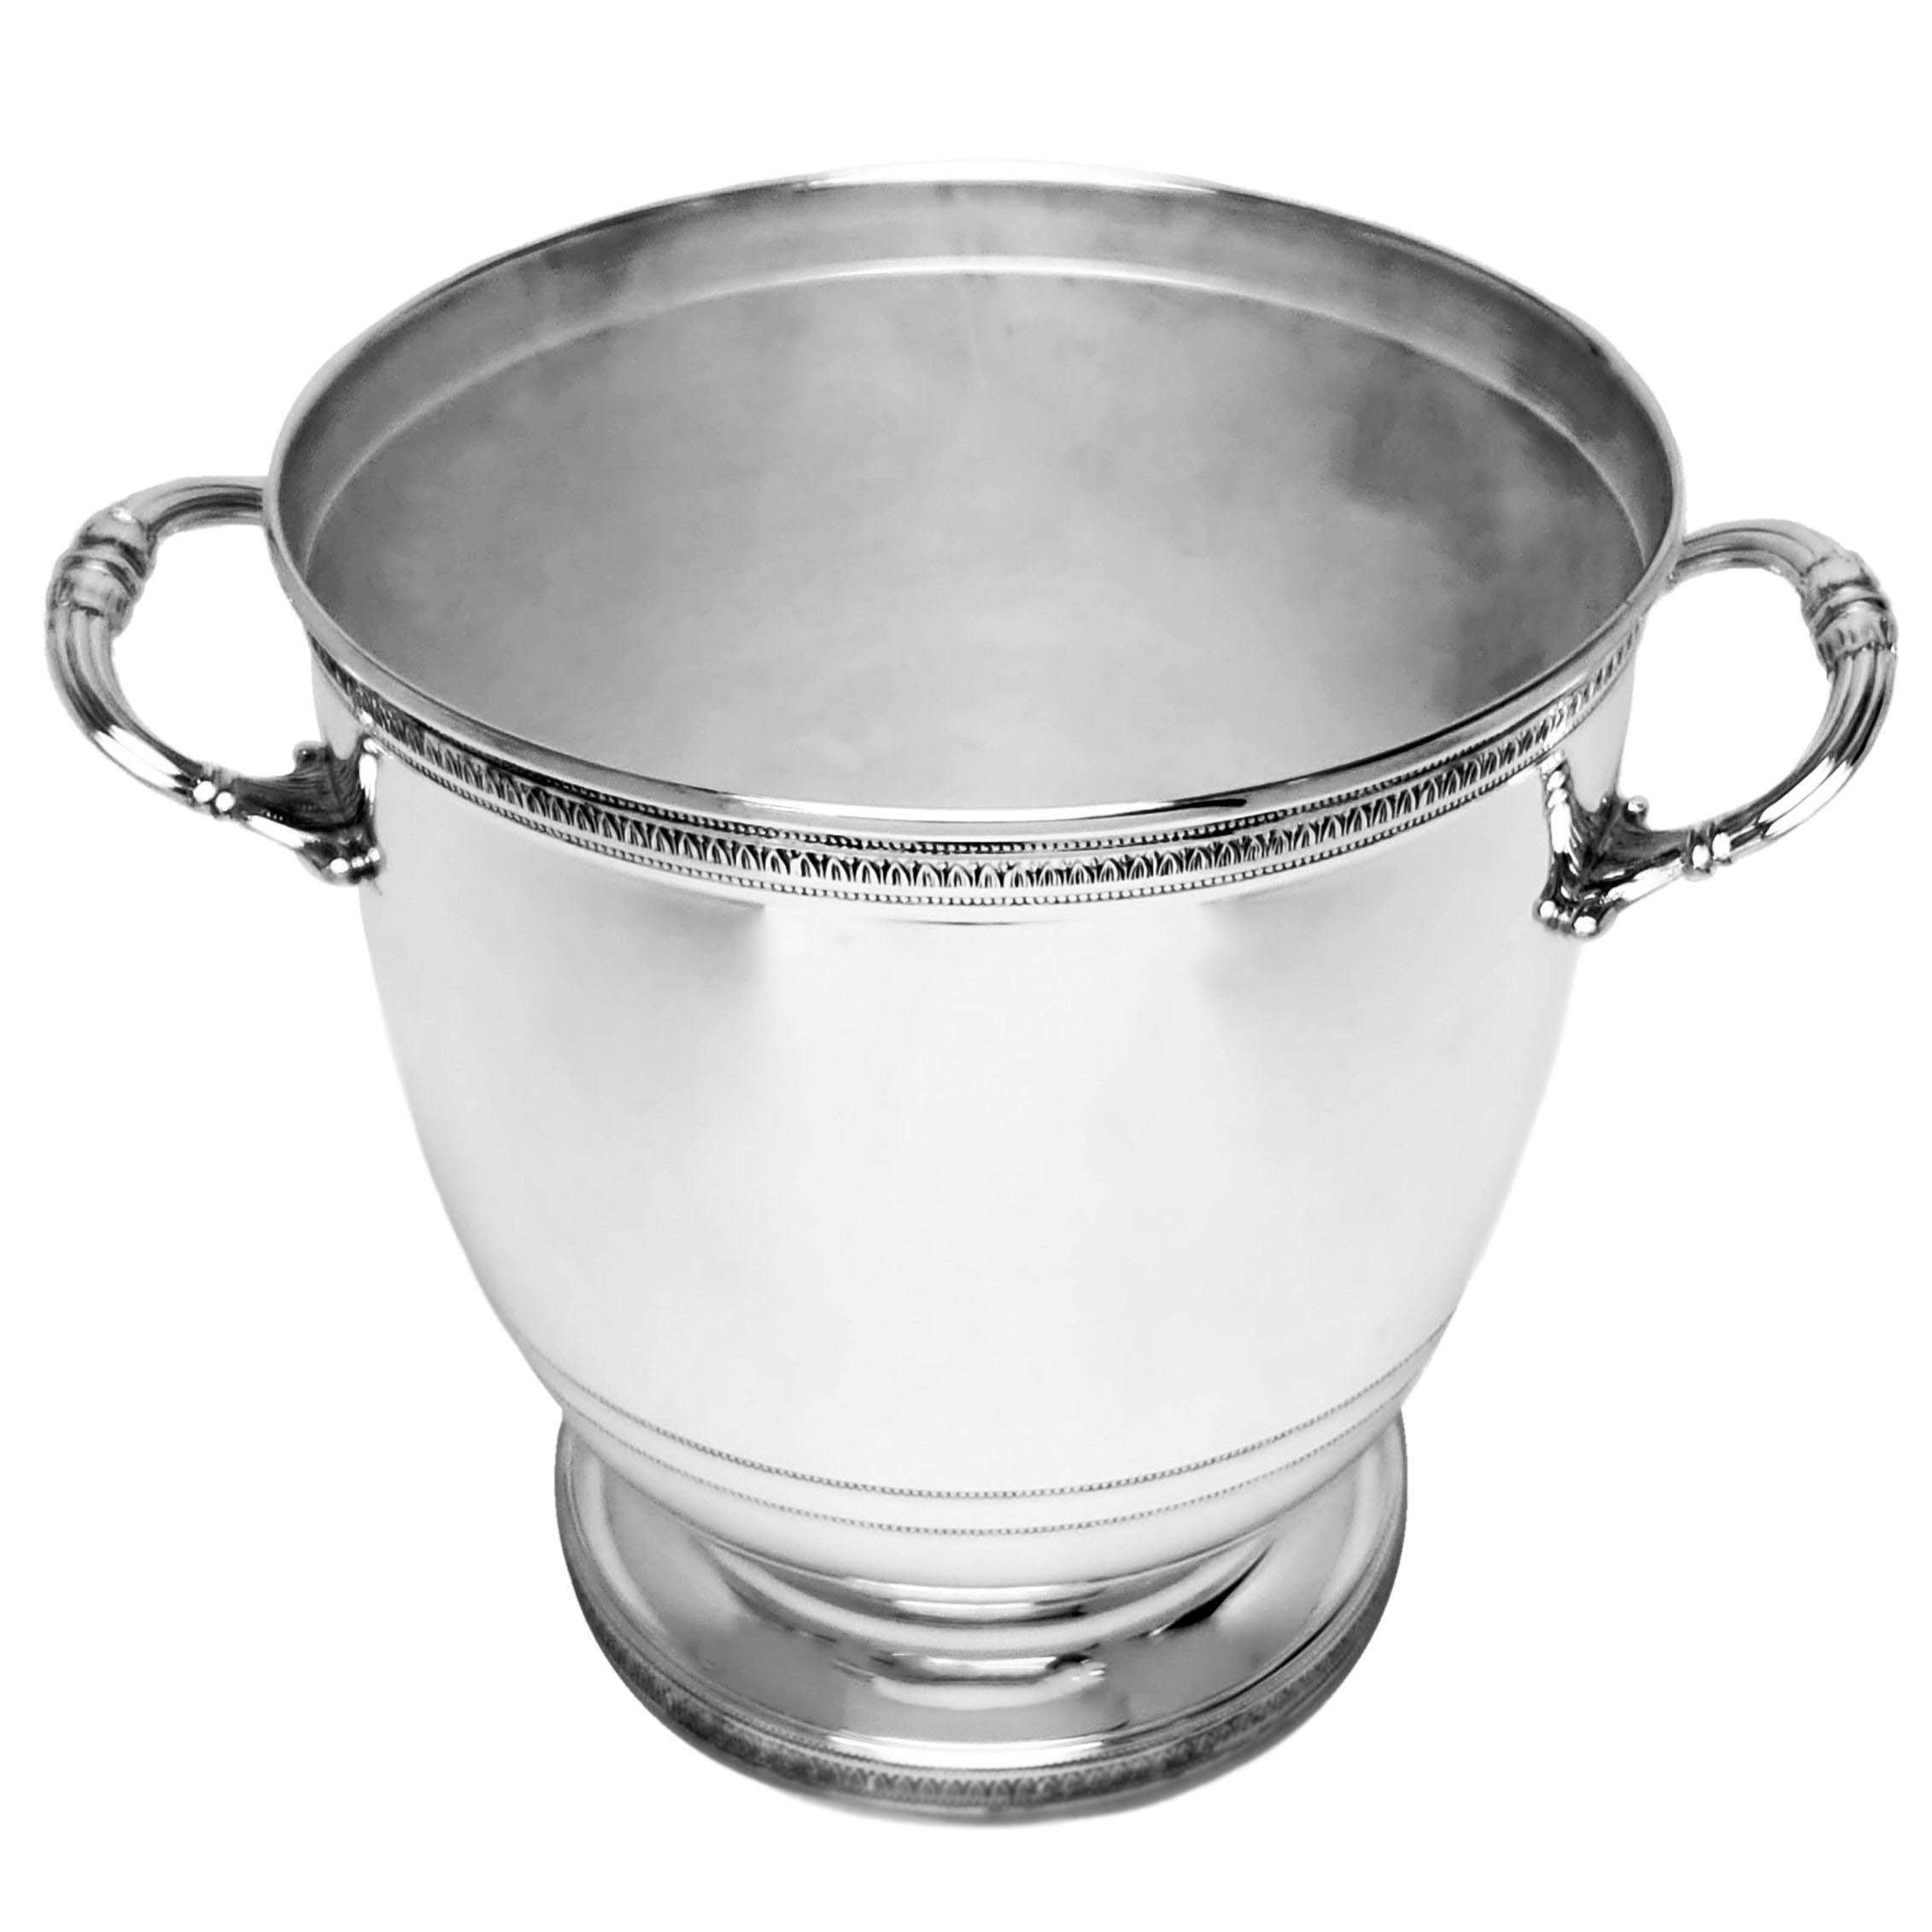 An impressive vintage solid Silver Italian Champagne / Wine Cooler with a highly polished exterior. The Ice Bucket is embellished with delicately patterned applied bands on the upper rim & the foot. The Cooler has two patterned handles.

Made in